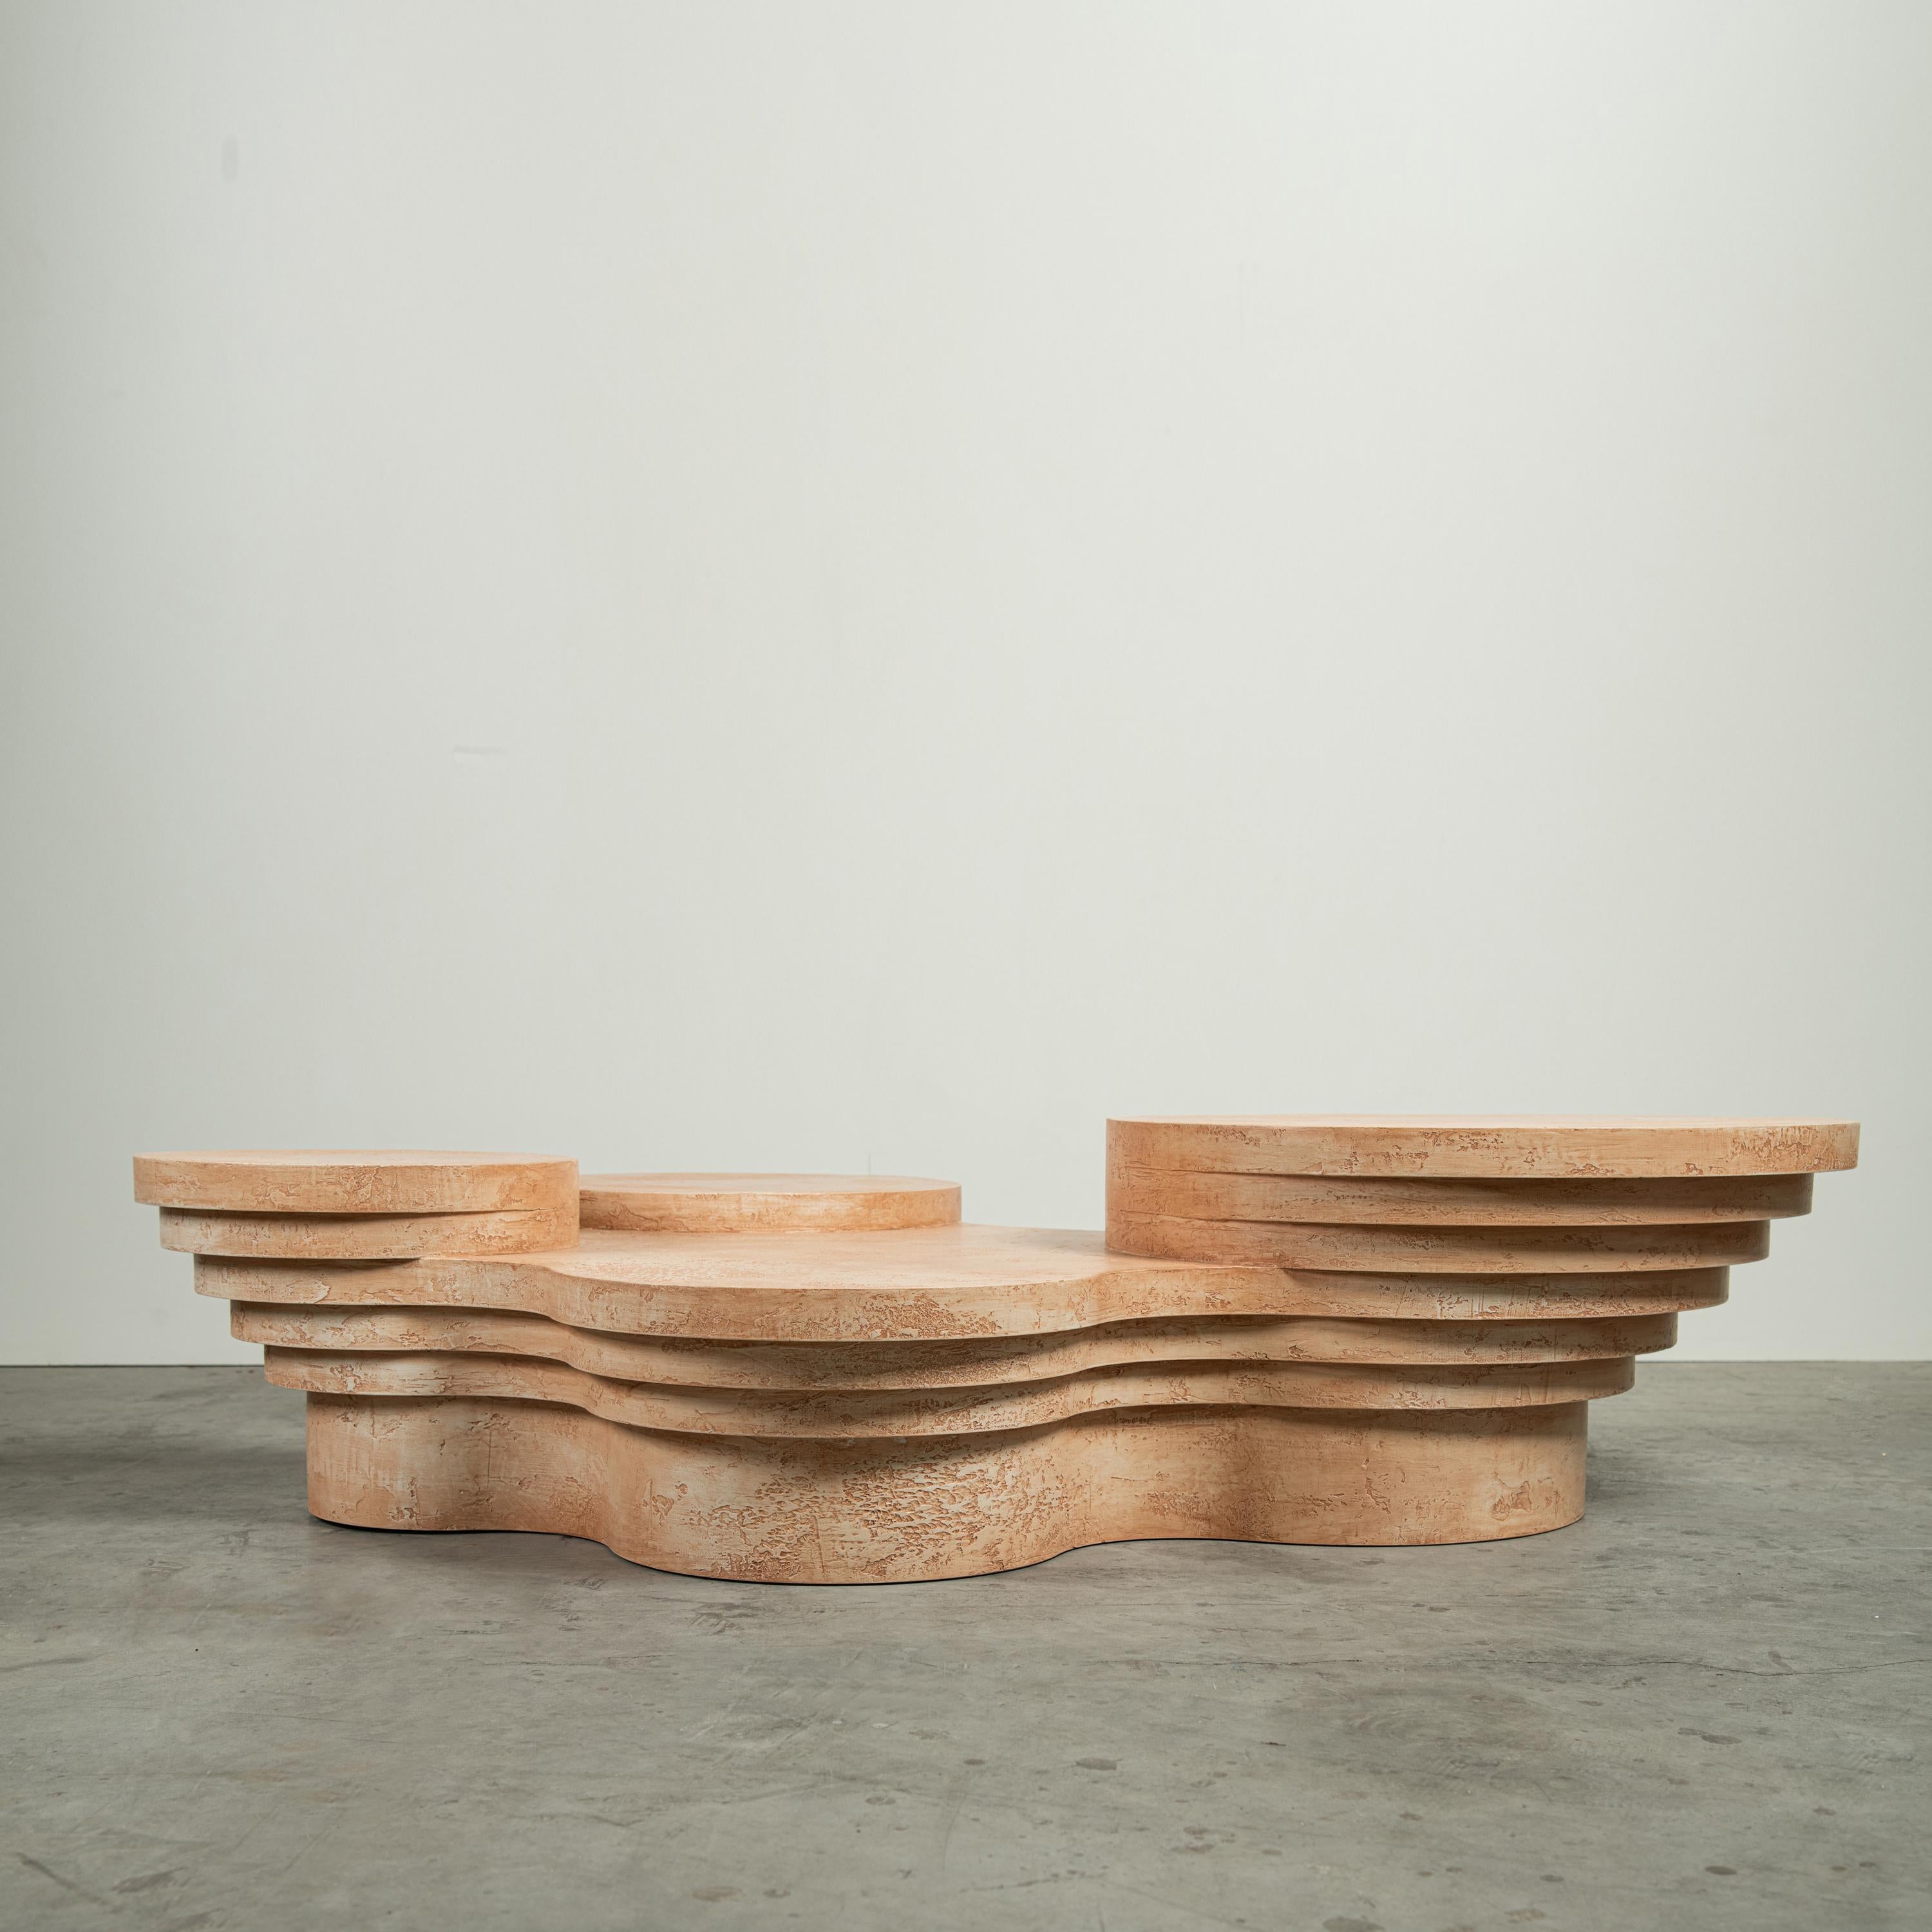 Slice me up sculptural coffee table by Pietro Franceschini.
Sold exclusively by Galerie Philia.
Manufacturer: We Do.
Dimensions: W 160 x L 120 x H 36 cm.
Materials: Radica Di Betulla Matte.


Pietro Franceschini is an architect and designer based in